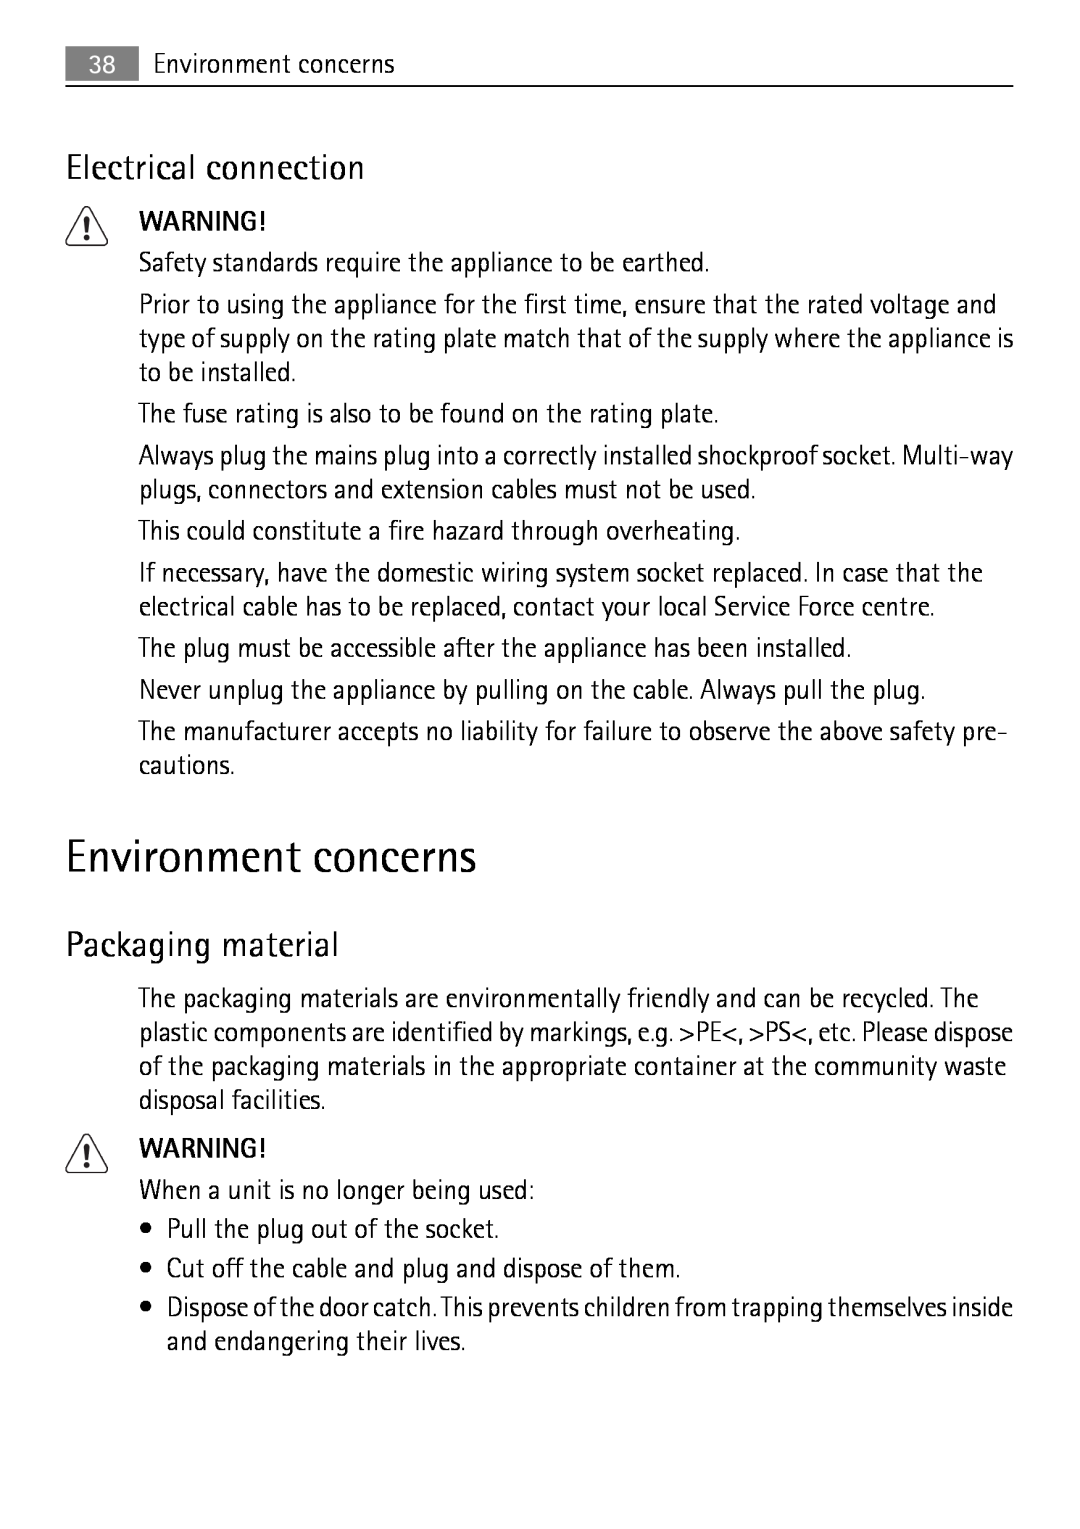 Electrolux 50870 user manual Environment concerns, Electrical connection, Packaging material 